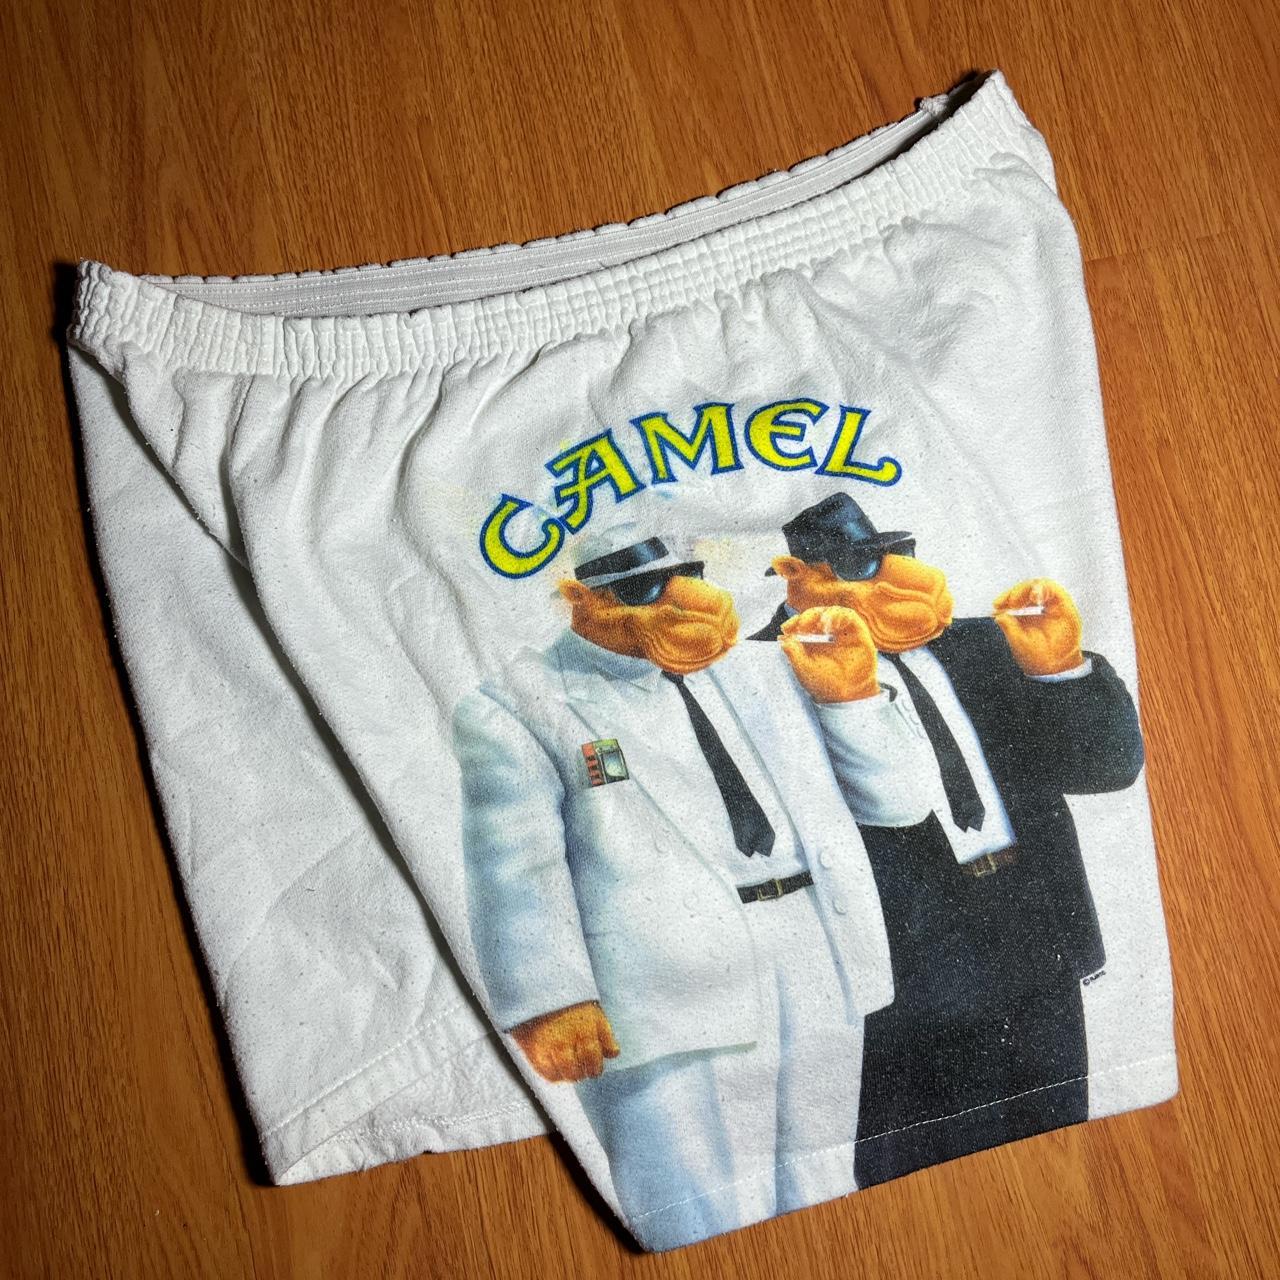 Camel Men's White and Yellow Shorts